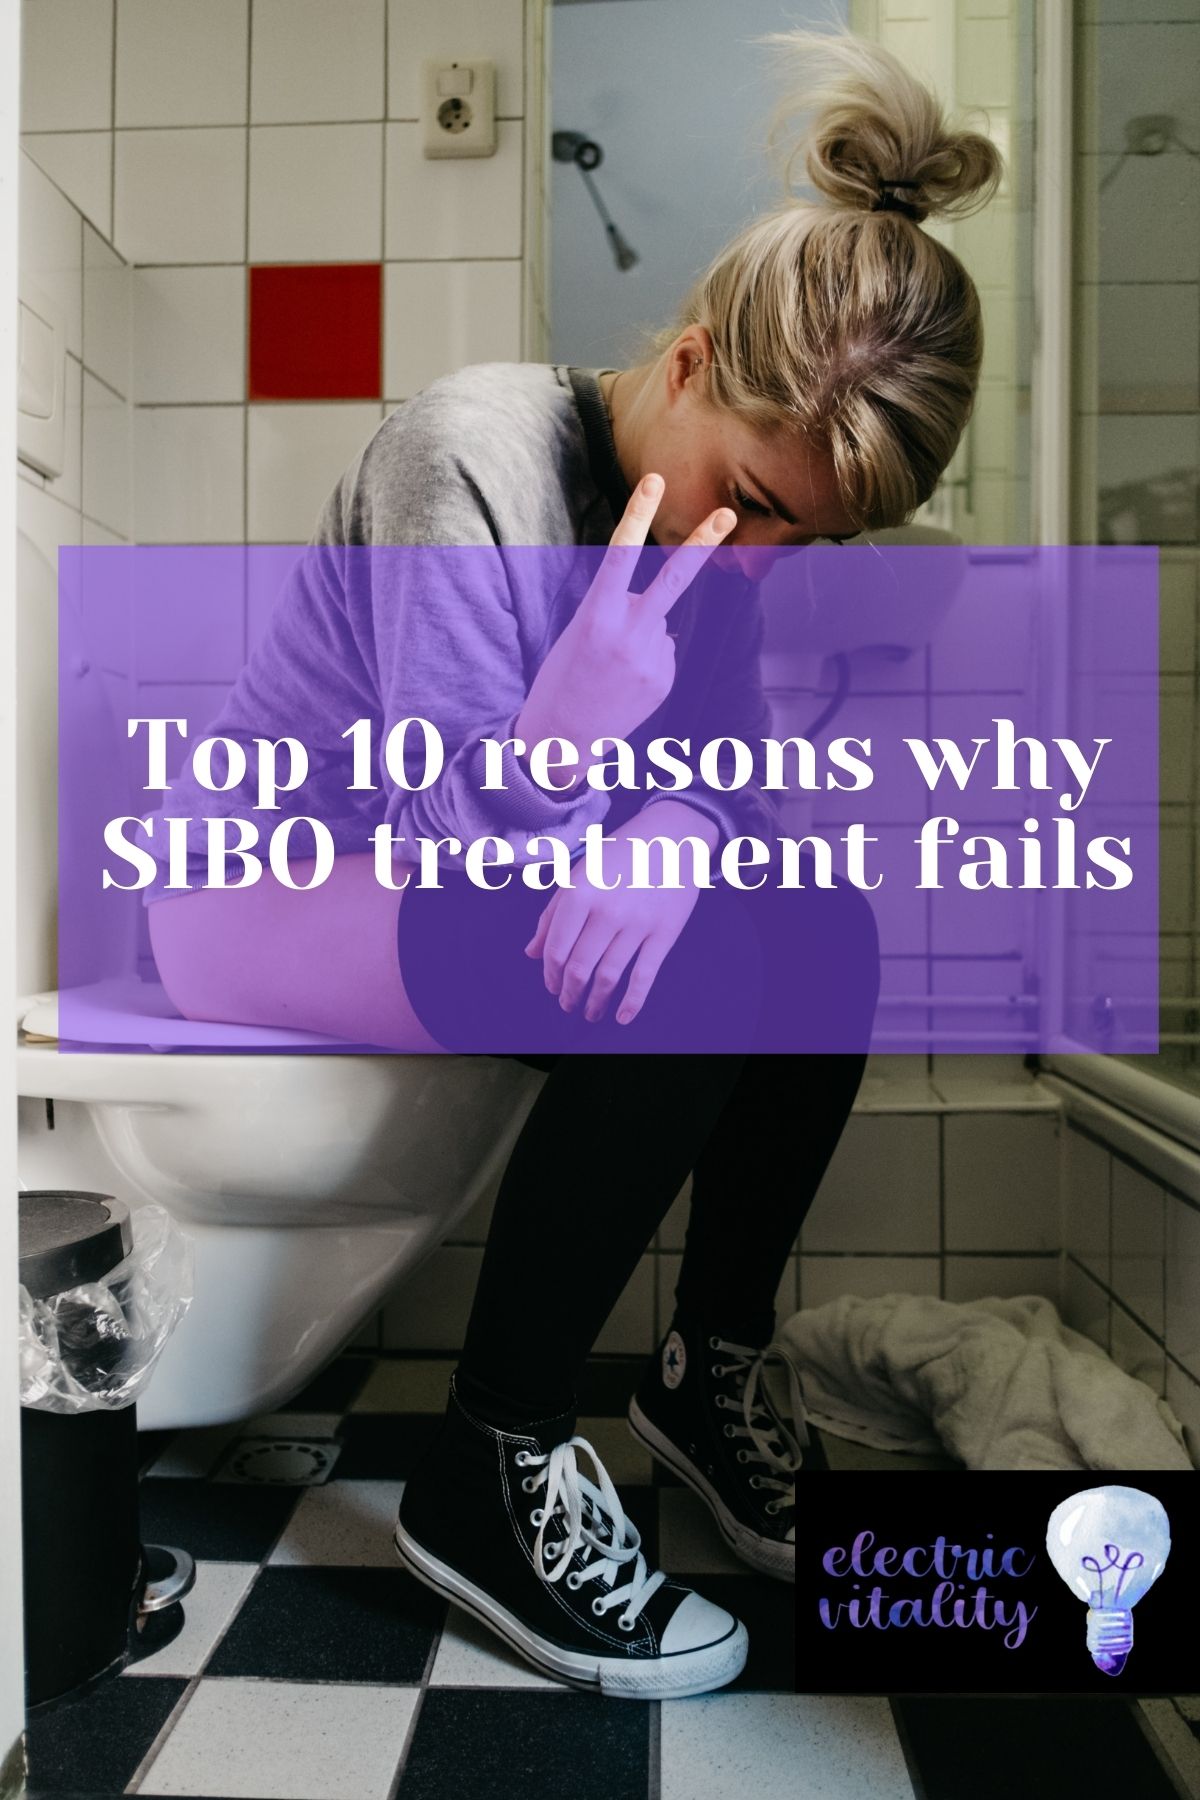 Image of woman sitting on toilet bowl with text "Top 10 reasons why SIBO treatment fails"